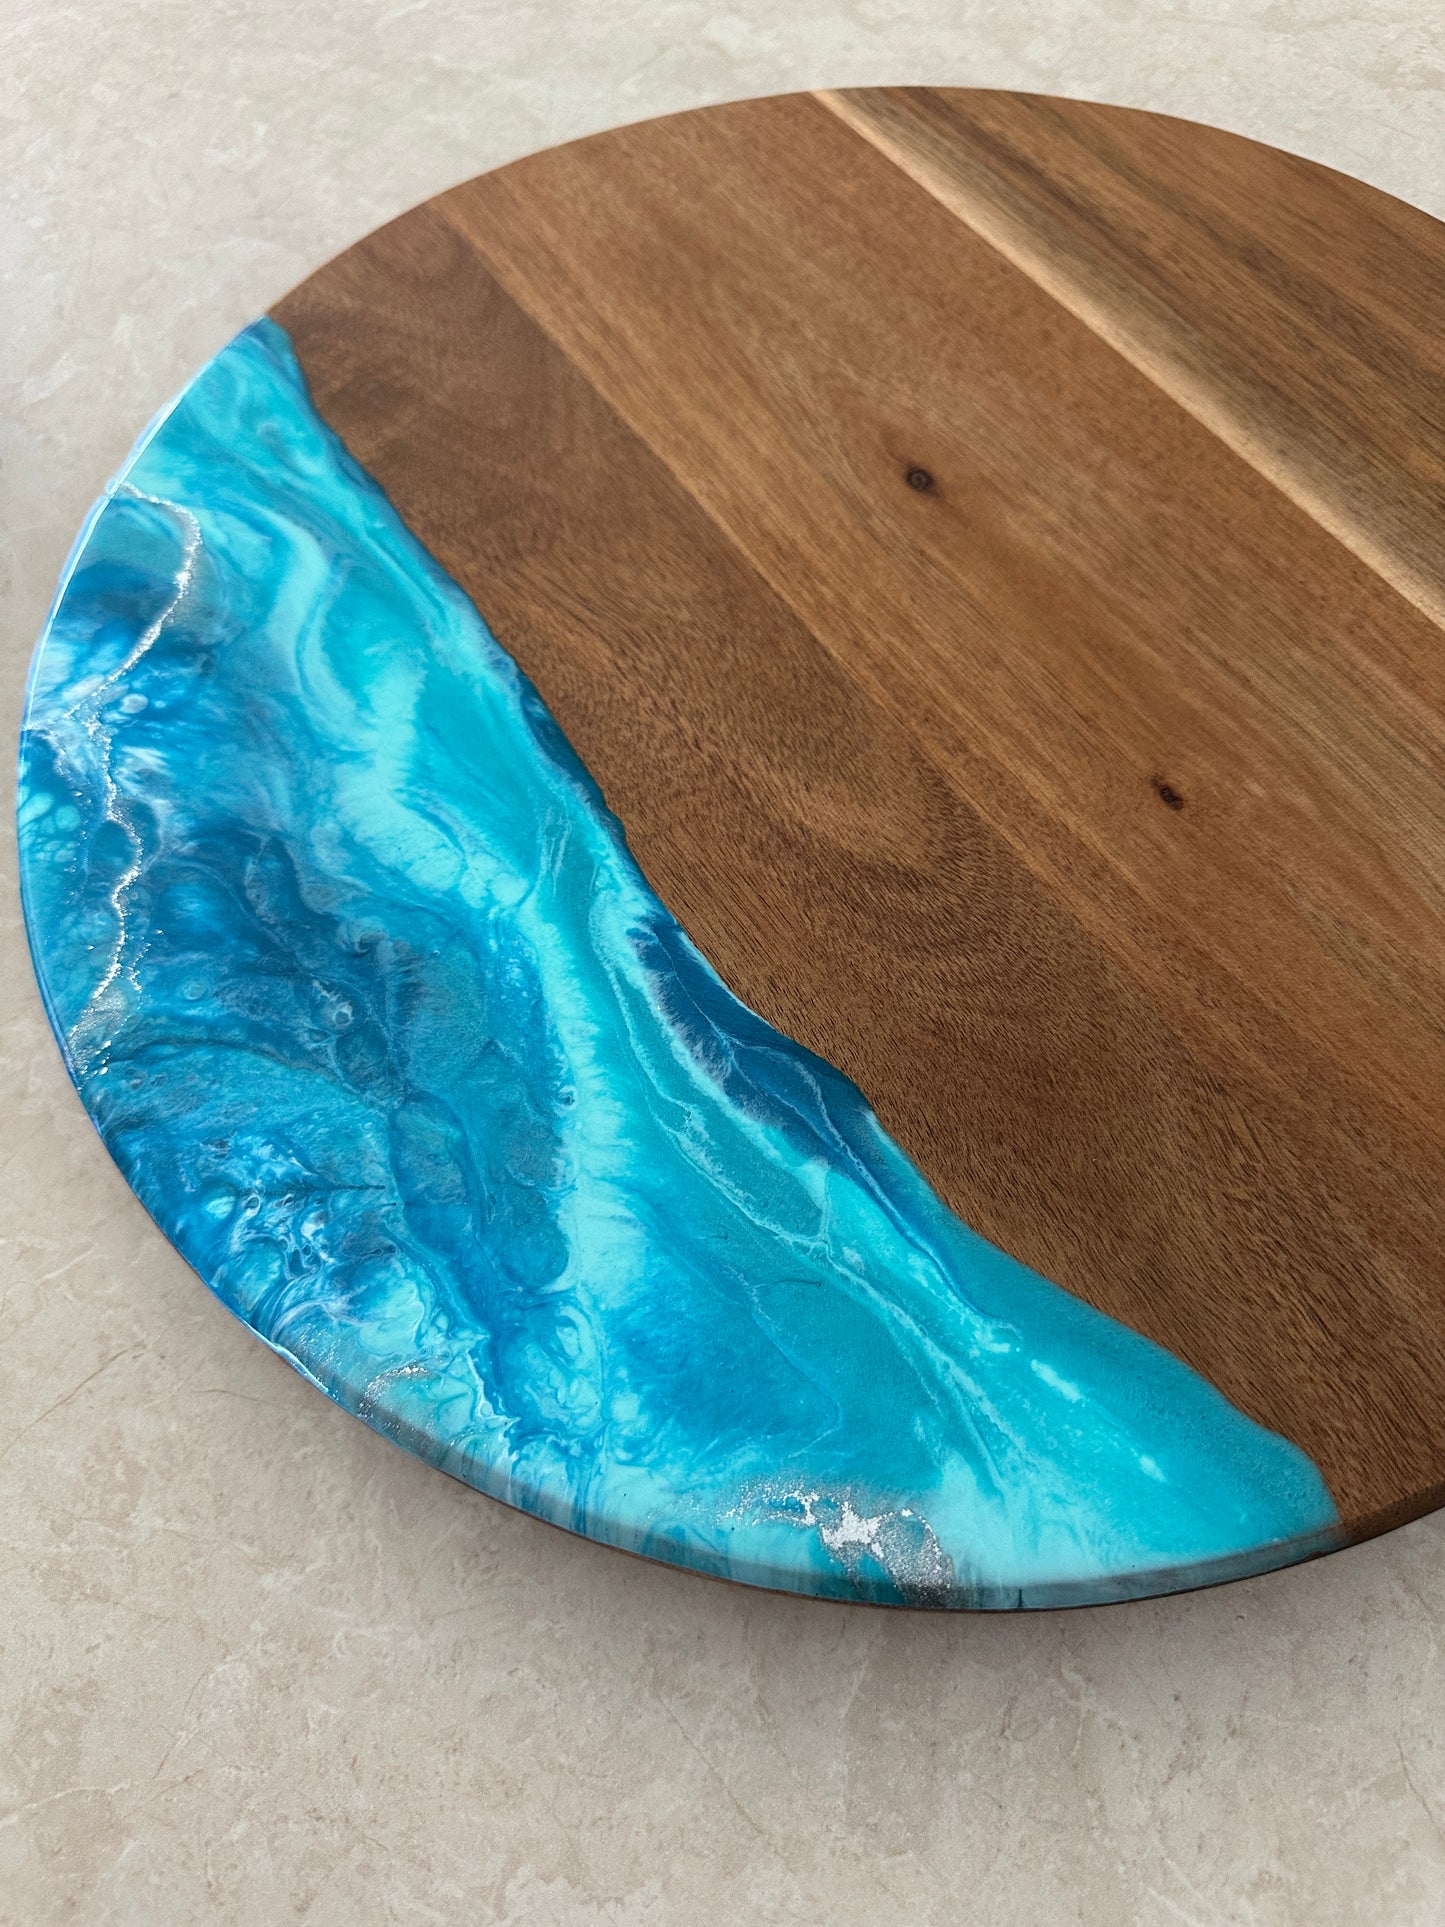 LAZY SUSAN - in aqua and teal resin